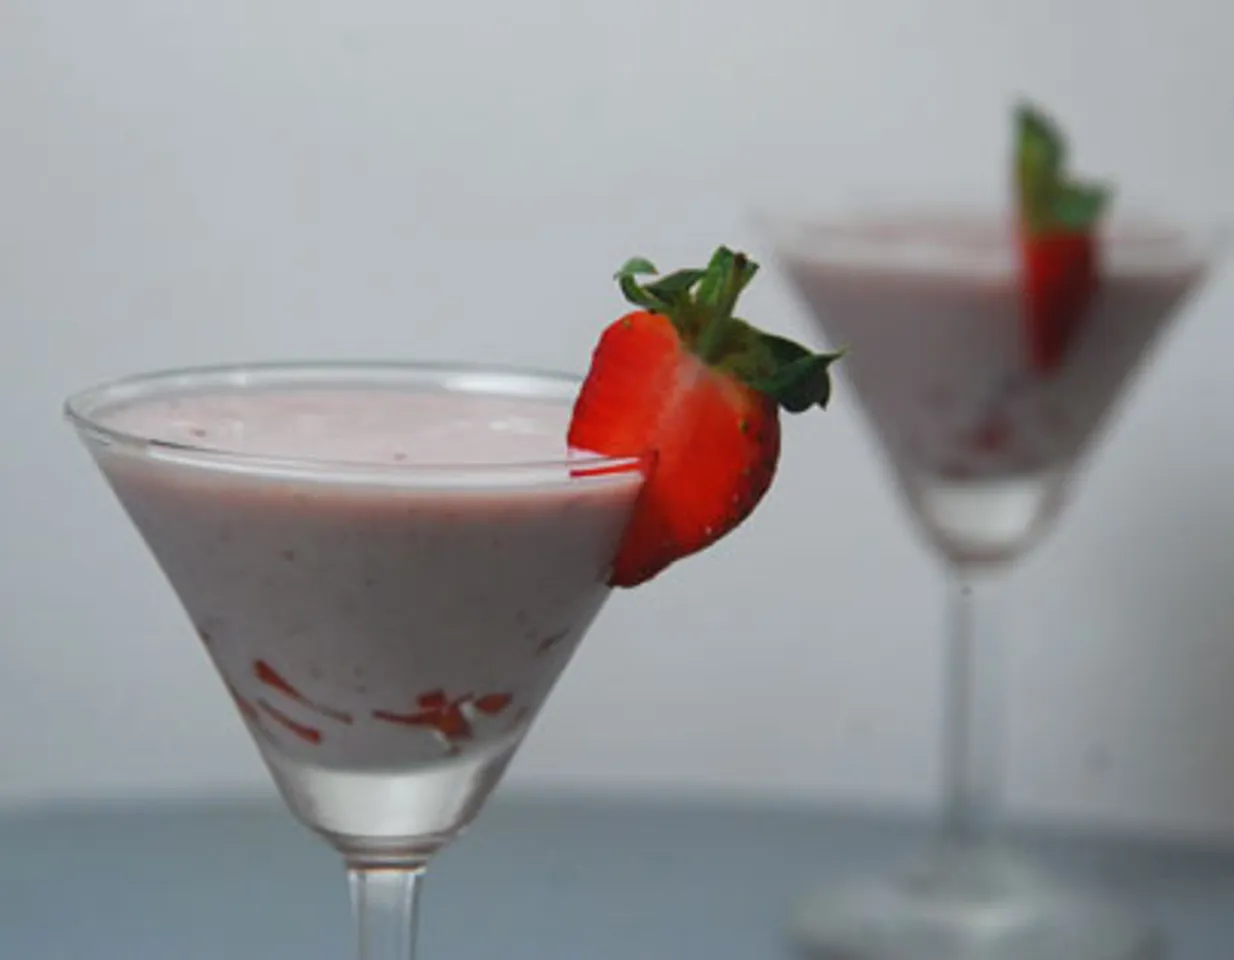 Eggless Strawberry Mousse